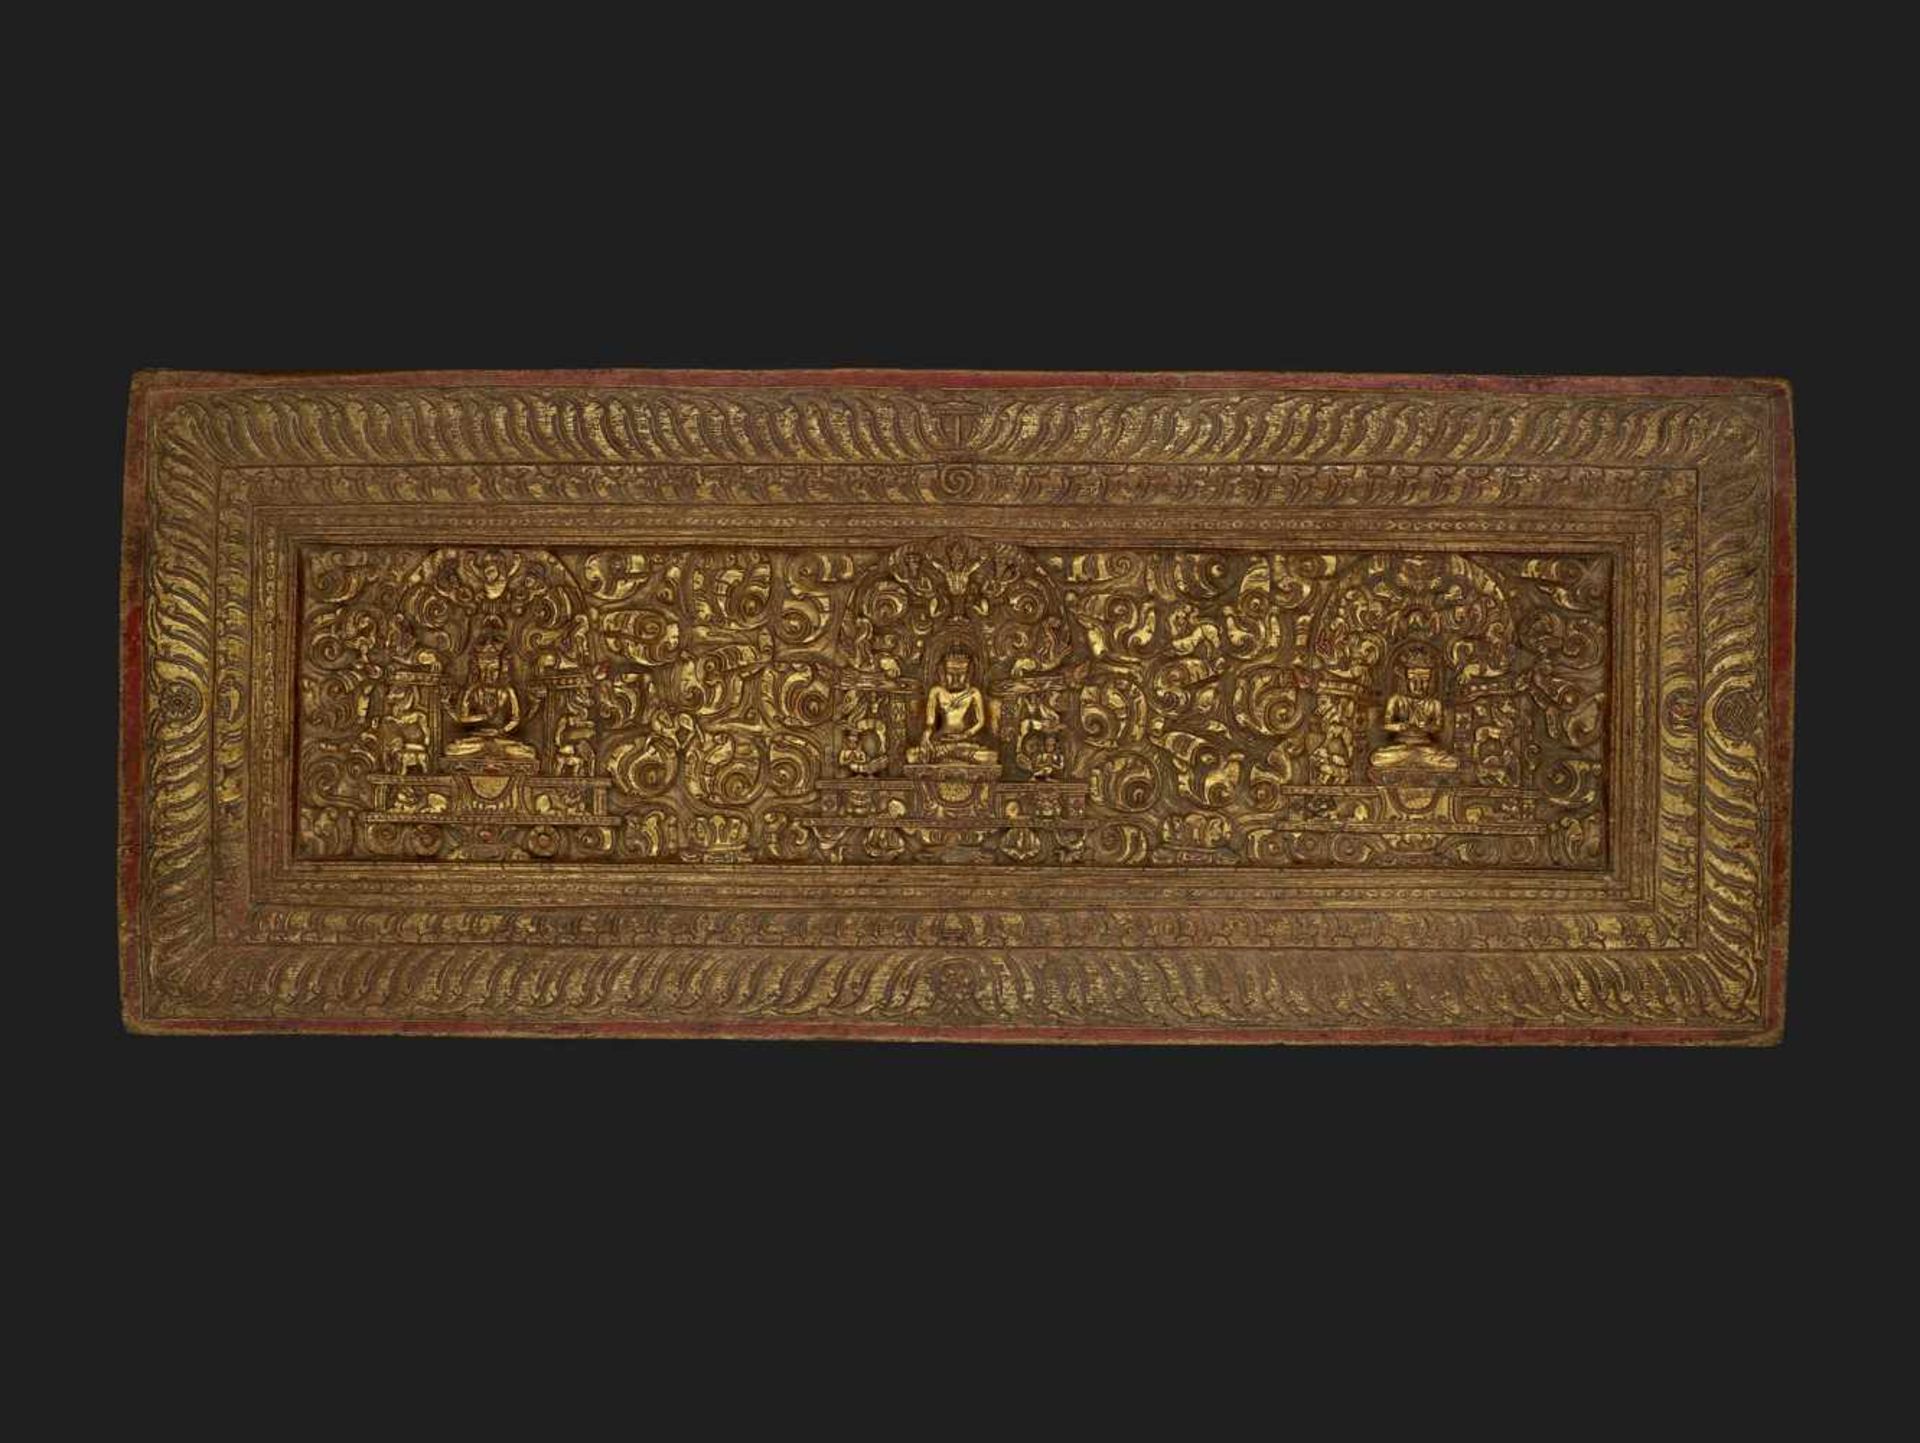 A RARE MANUSCRIPT COVER 17TH CENTURY Tibet, 17th - earlier 18th century. The finely carved and